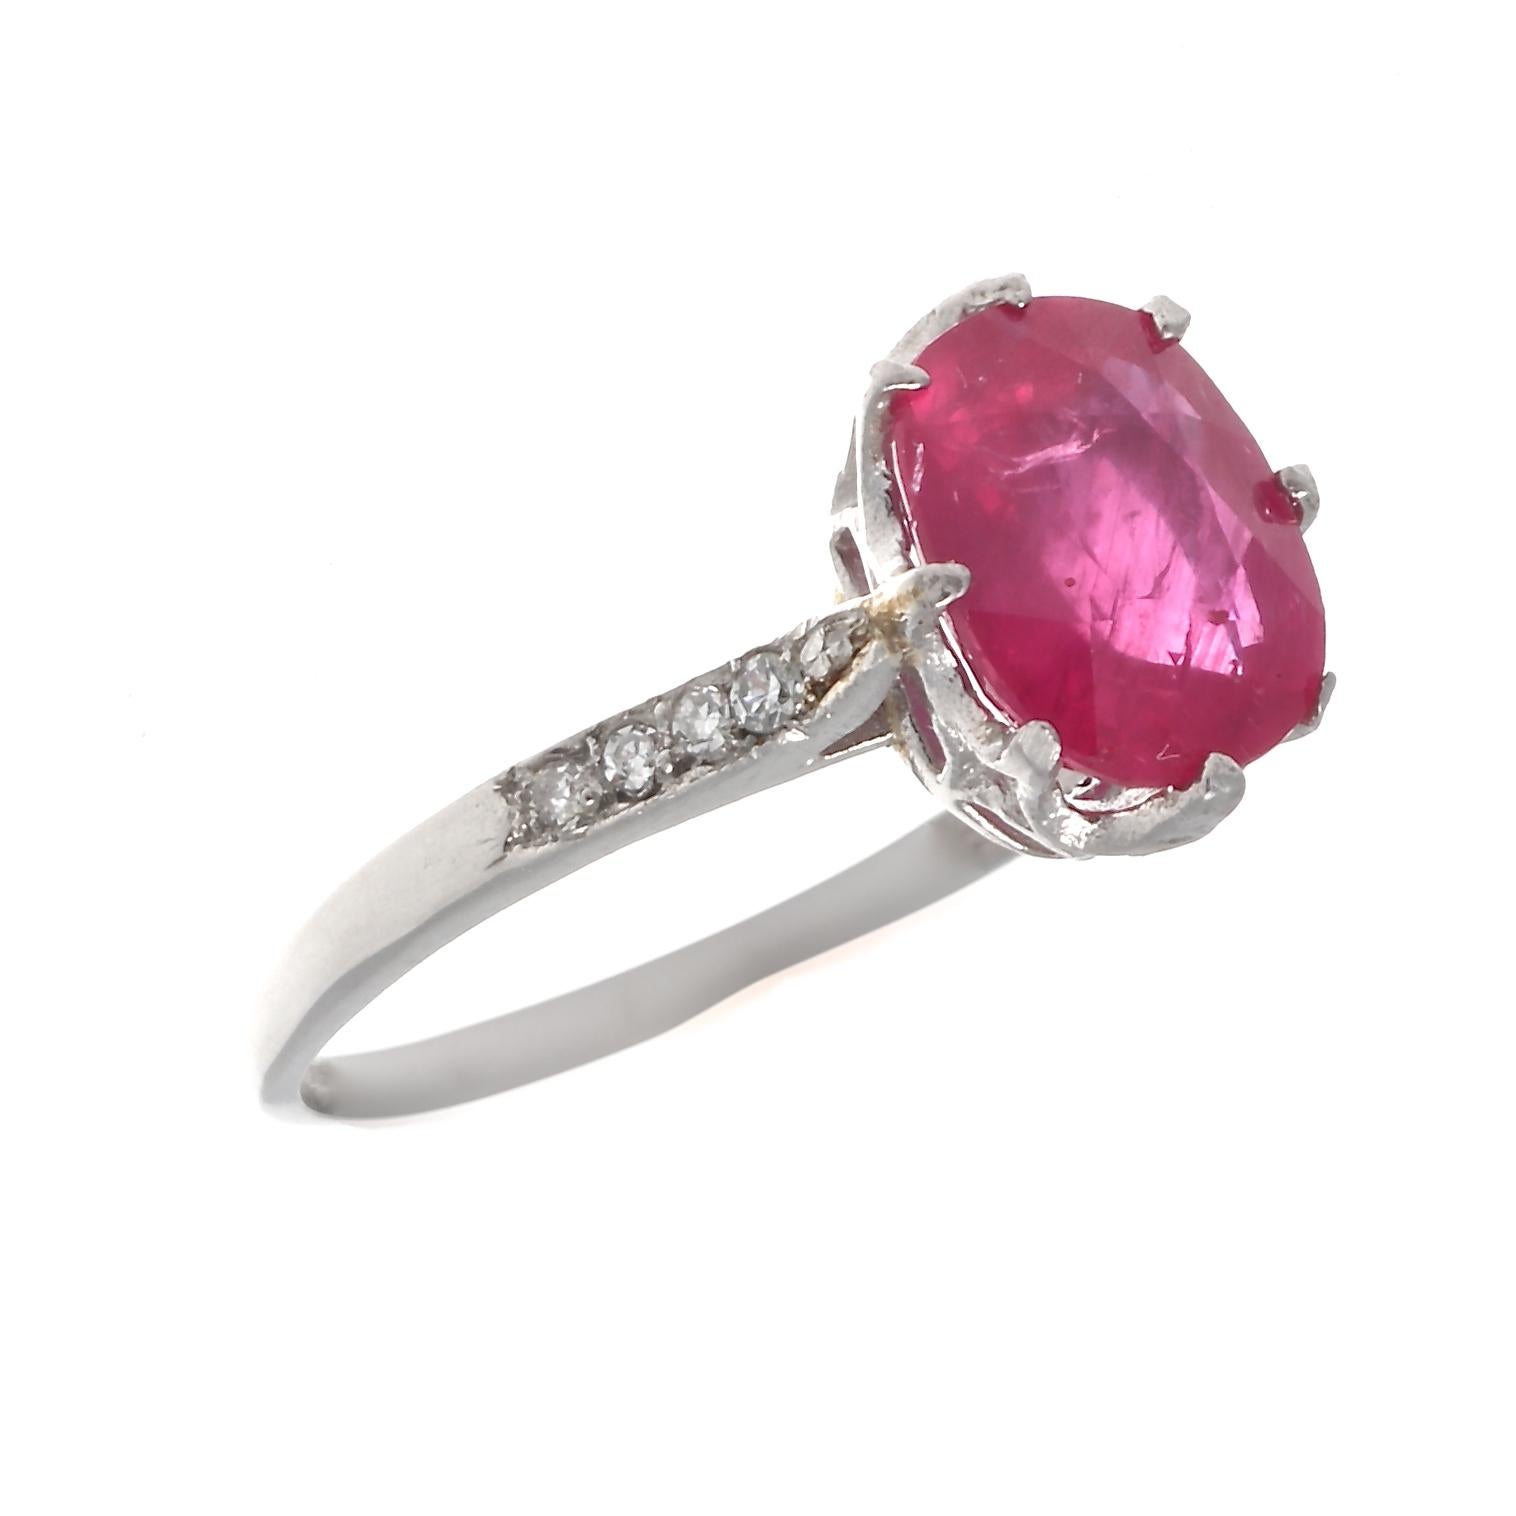 A symbol of commitment combined with the color of love. Featuring an approximately 1.60 carat glowing red oval cut ruby that is GIA certified. Classically accented by shoulders of numerous near colorless diamonds. Hand crafted in platinum. Ring size